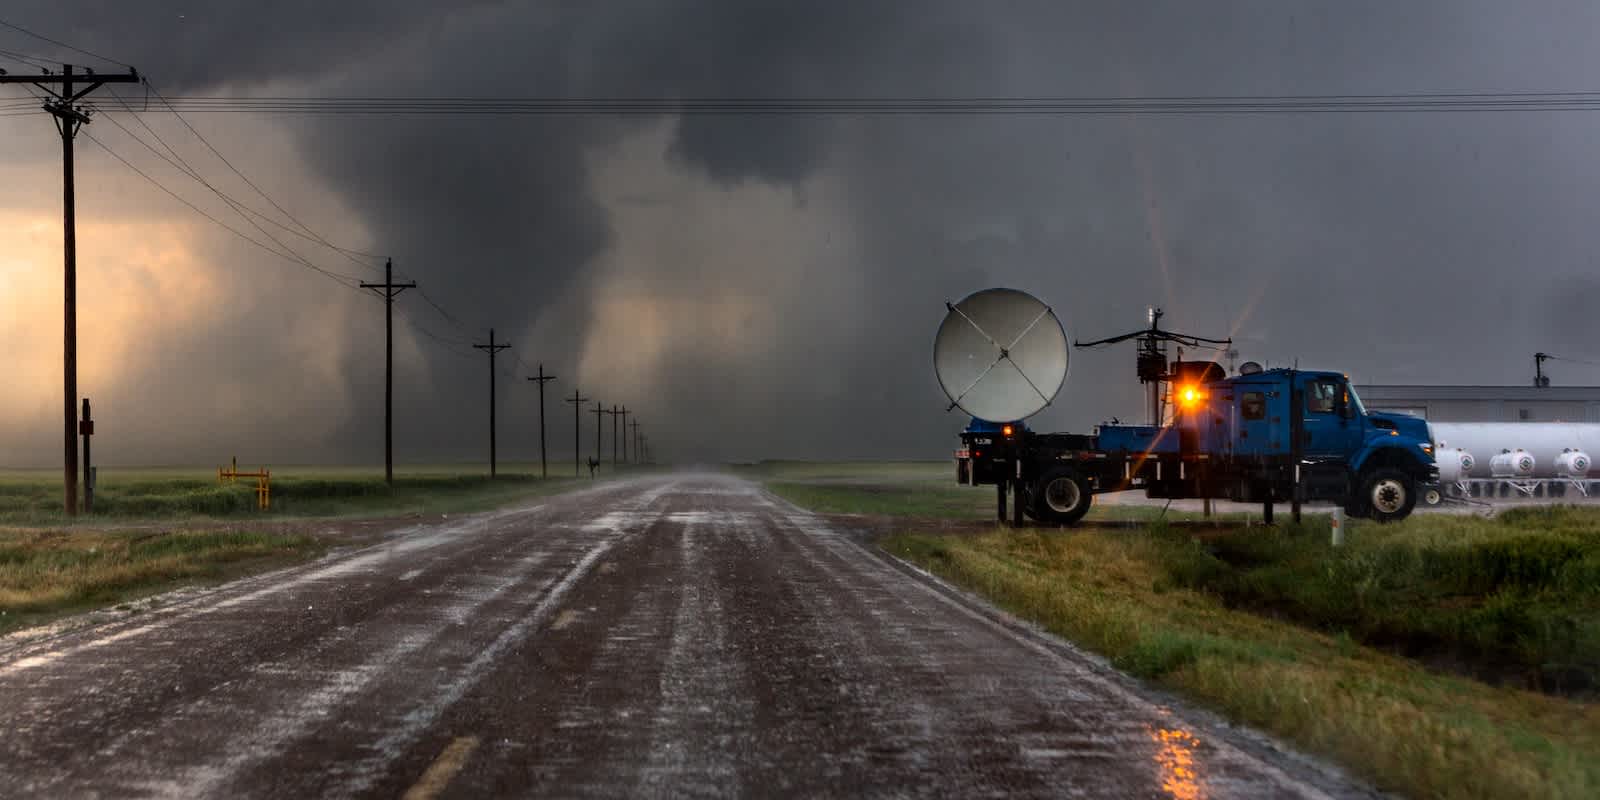 Forecasting trade activity is like predicting the weather - long-term trends with rapid short-term changes. A radar truck in the face of an oncoming storm doesn't provide all the answers, but gives you time to react.